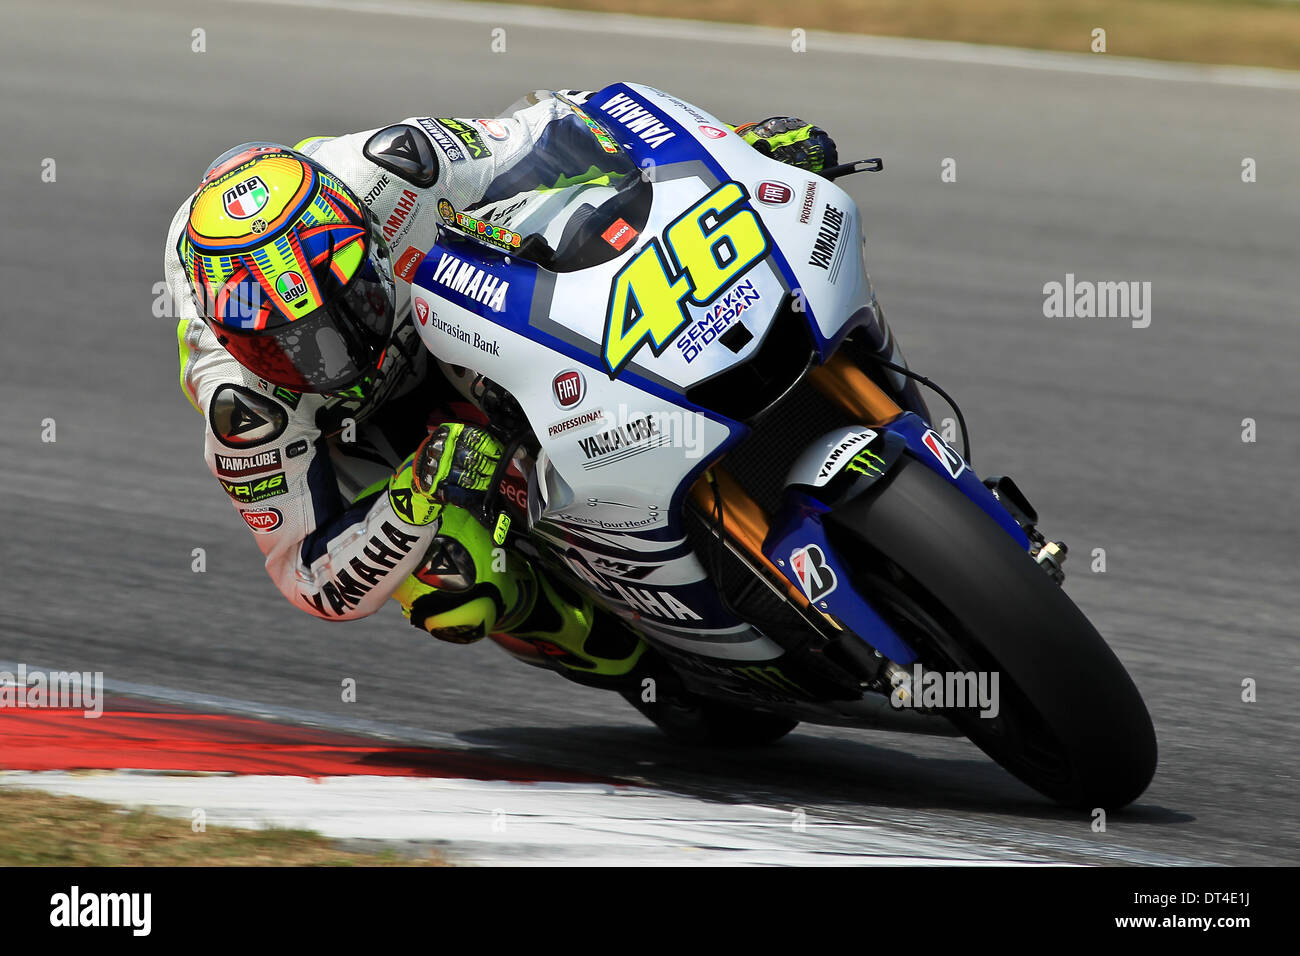 Sepang, Malaysia. 04th Feb, 2014. Valentino Rossi of Yamaha Factory Racing  in action during the first day of the first official MotoGP testing session  held at Sepang International Circuit in Sepang, Malaysia.